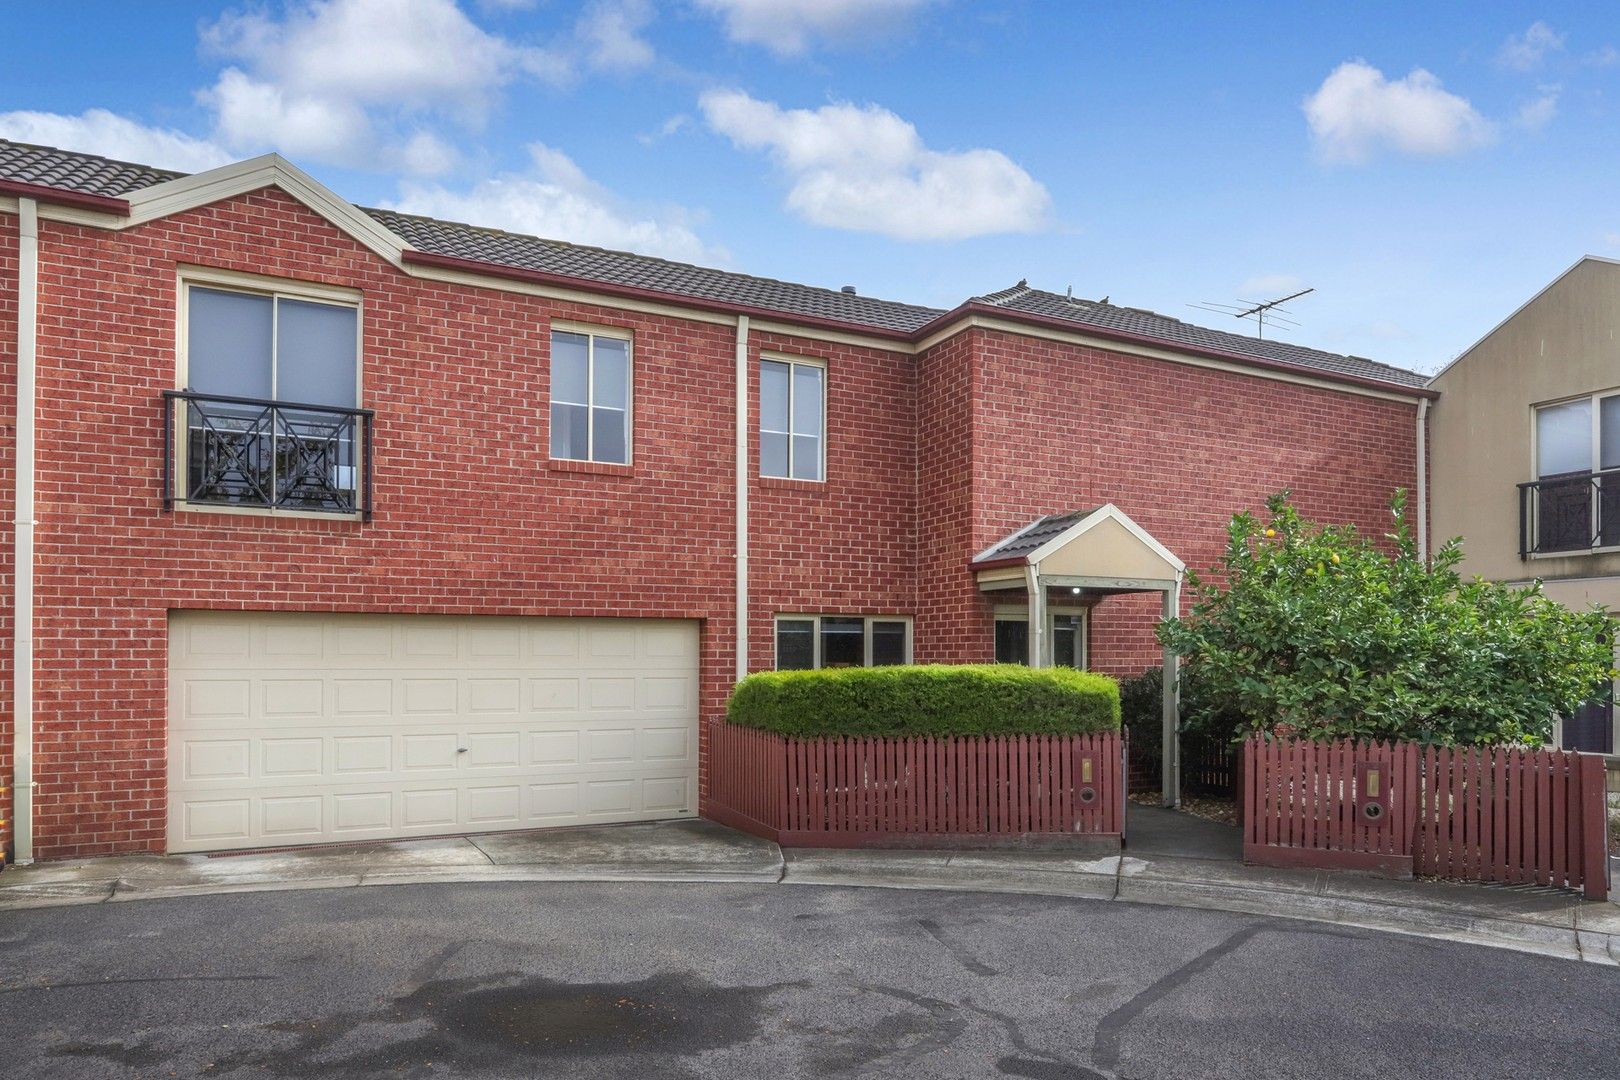 4 bedrooms Townhouse in 6/27 Marnoo Street BRAYBROOK VIC, 3019